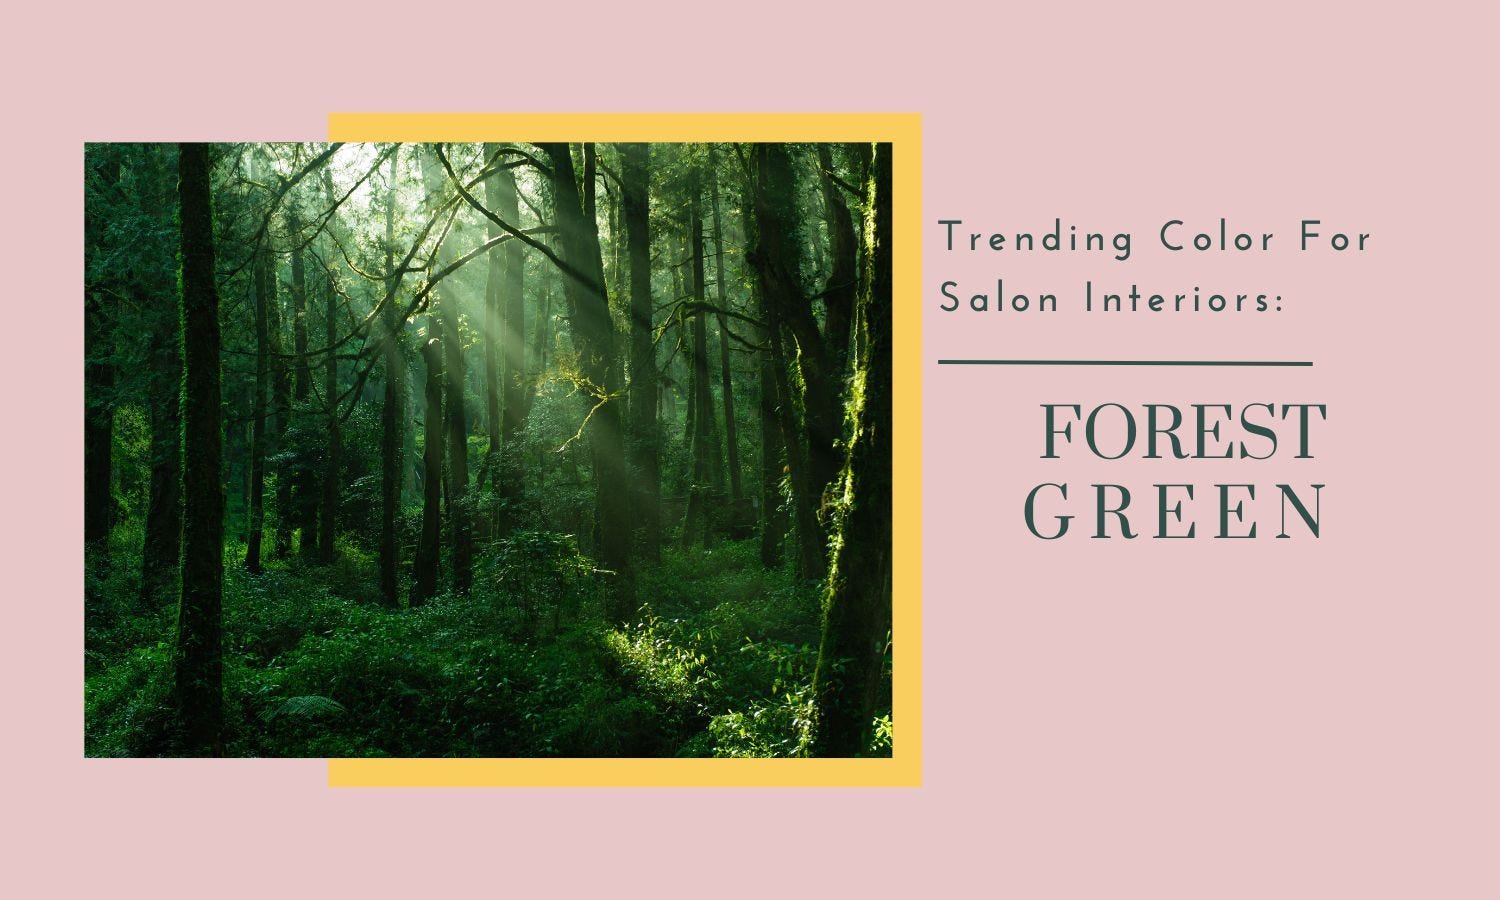 Trending Color For Salon Interiors: Forest Green